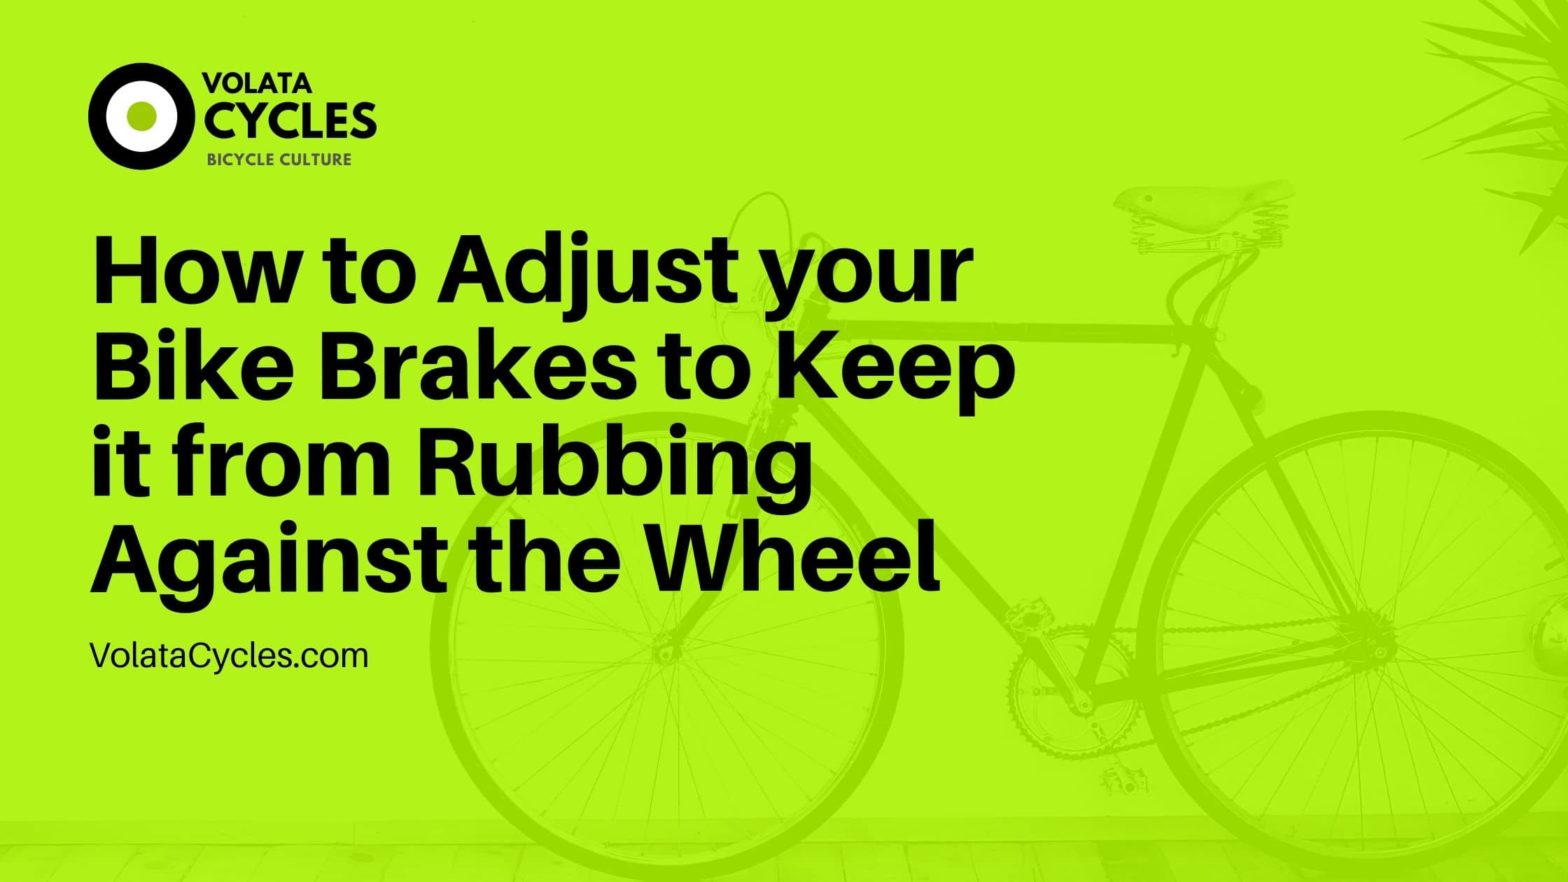 How-to-Adjust-your-Bike-Brakes-to-Keep-it-from-Rubbing-Against-the-Wheel